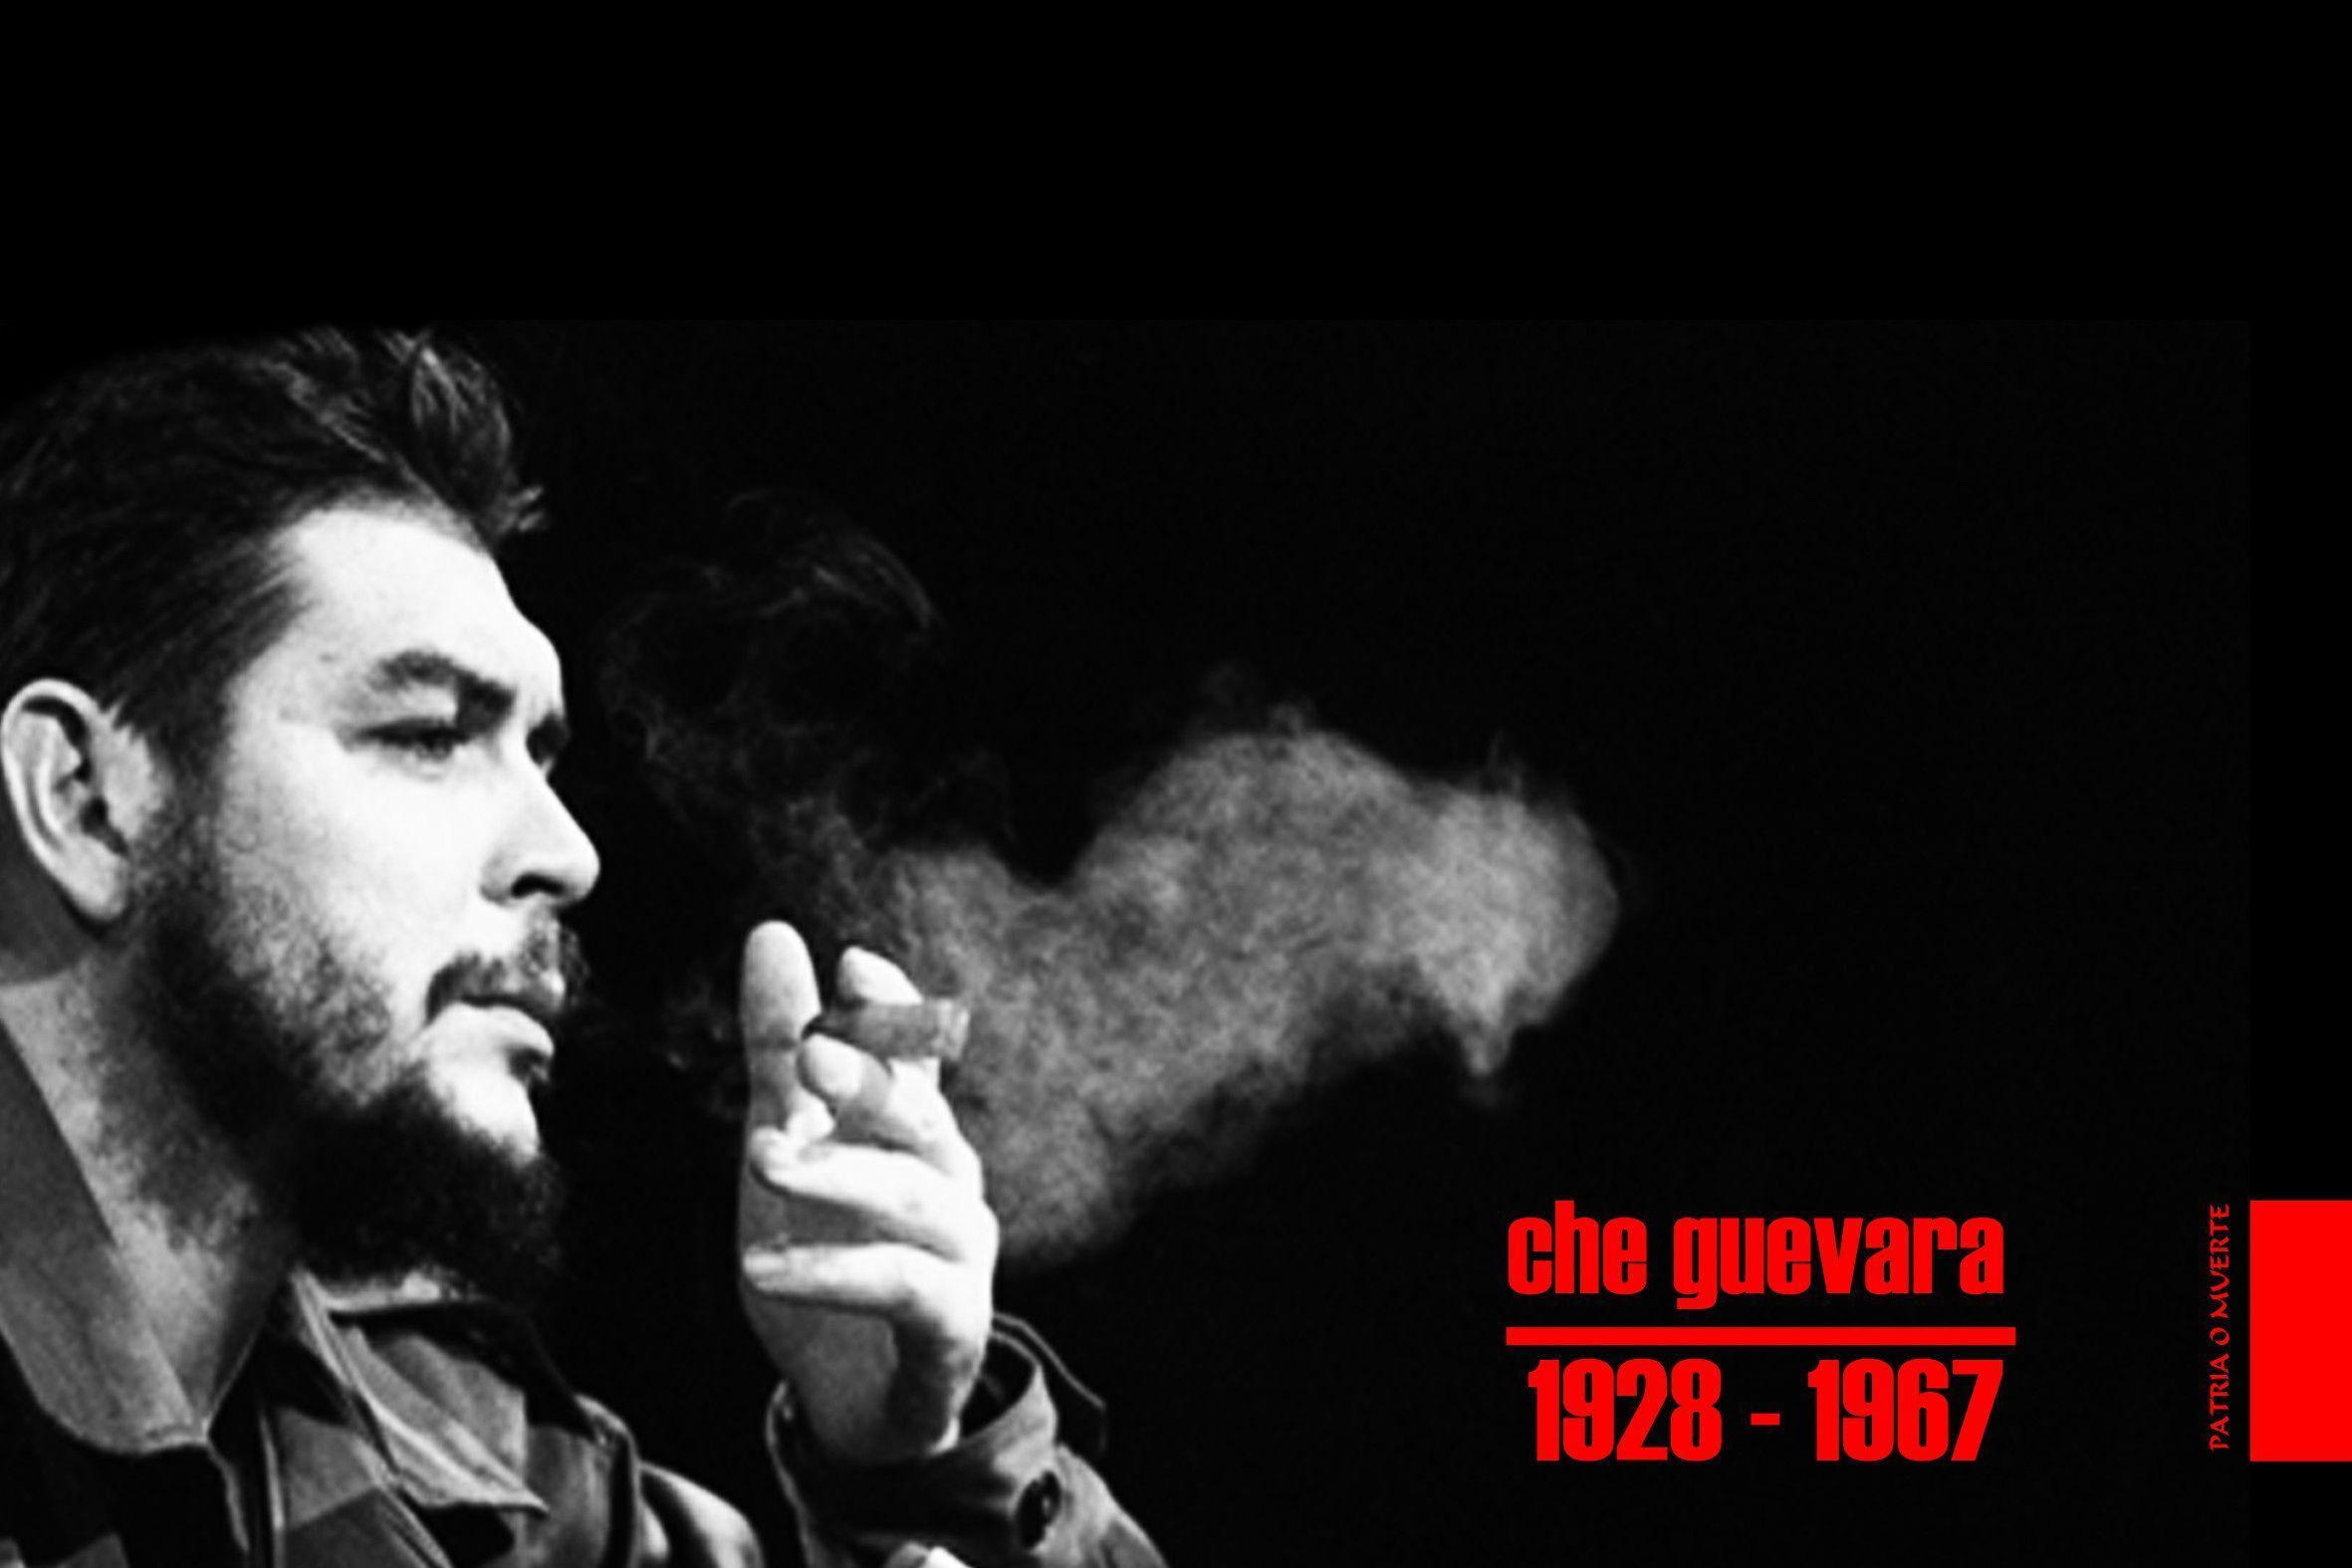 Coco&;s SEO guid for image: Che guevara, post 11